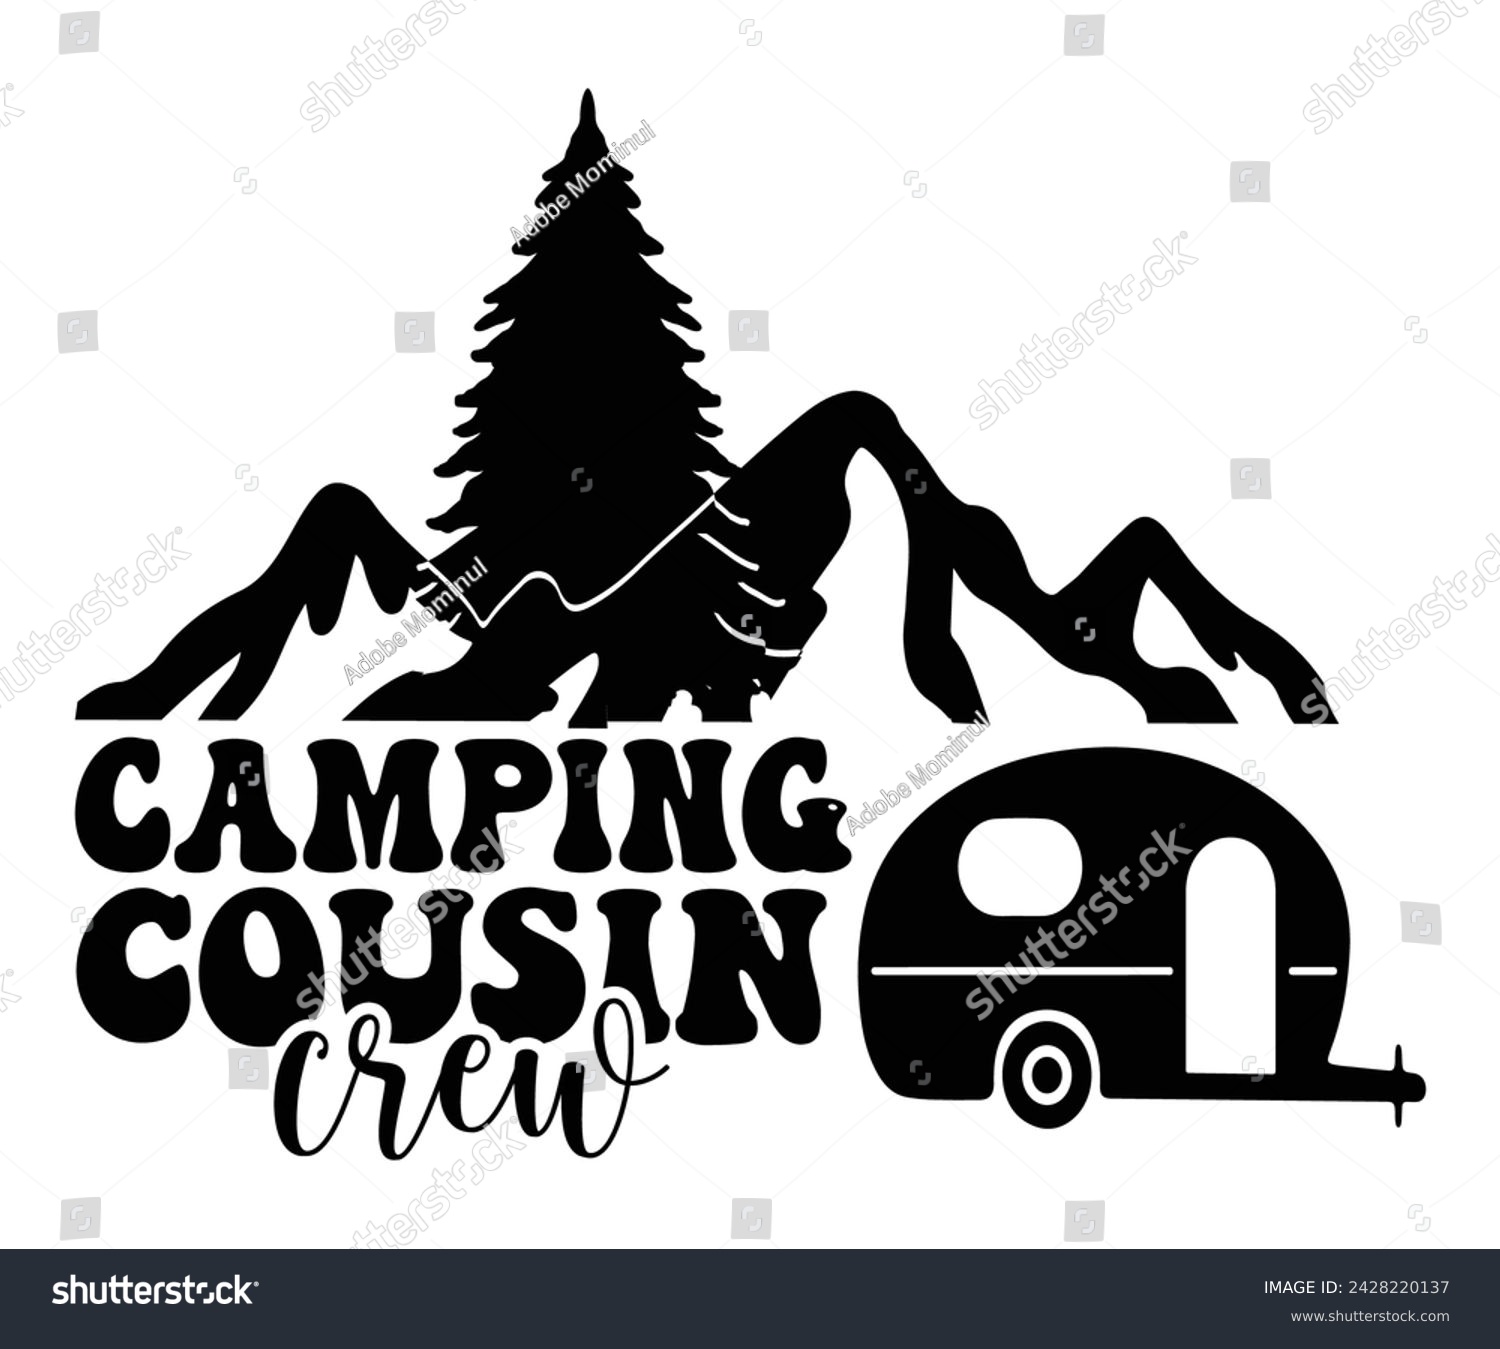 SVG of Camping Cousin Crew Svg,Happy Camper Svg,Camping Svg,Adventure Svg,Hiking Svg,Camp Saying,Camp Life Svg,Svg Cut Files, Png,Mountain T-shirt,Instant Download svg